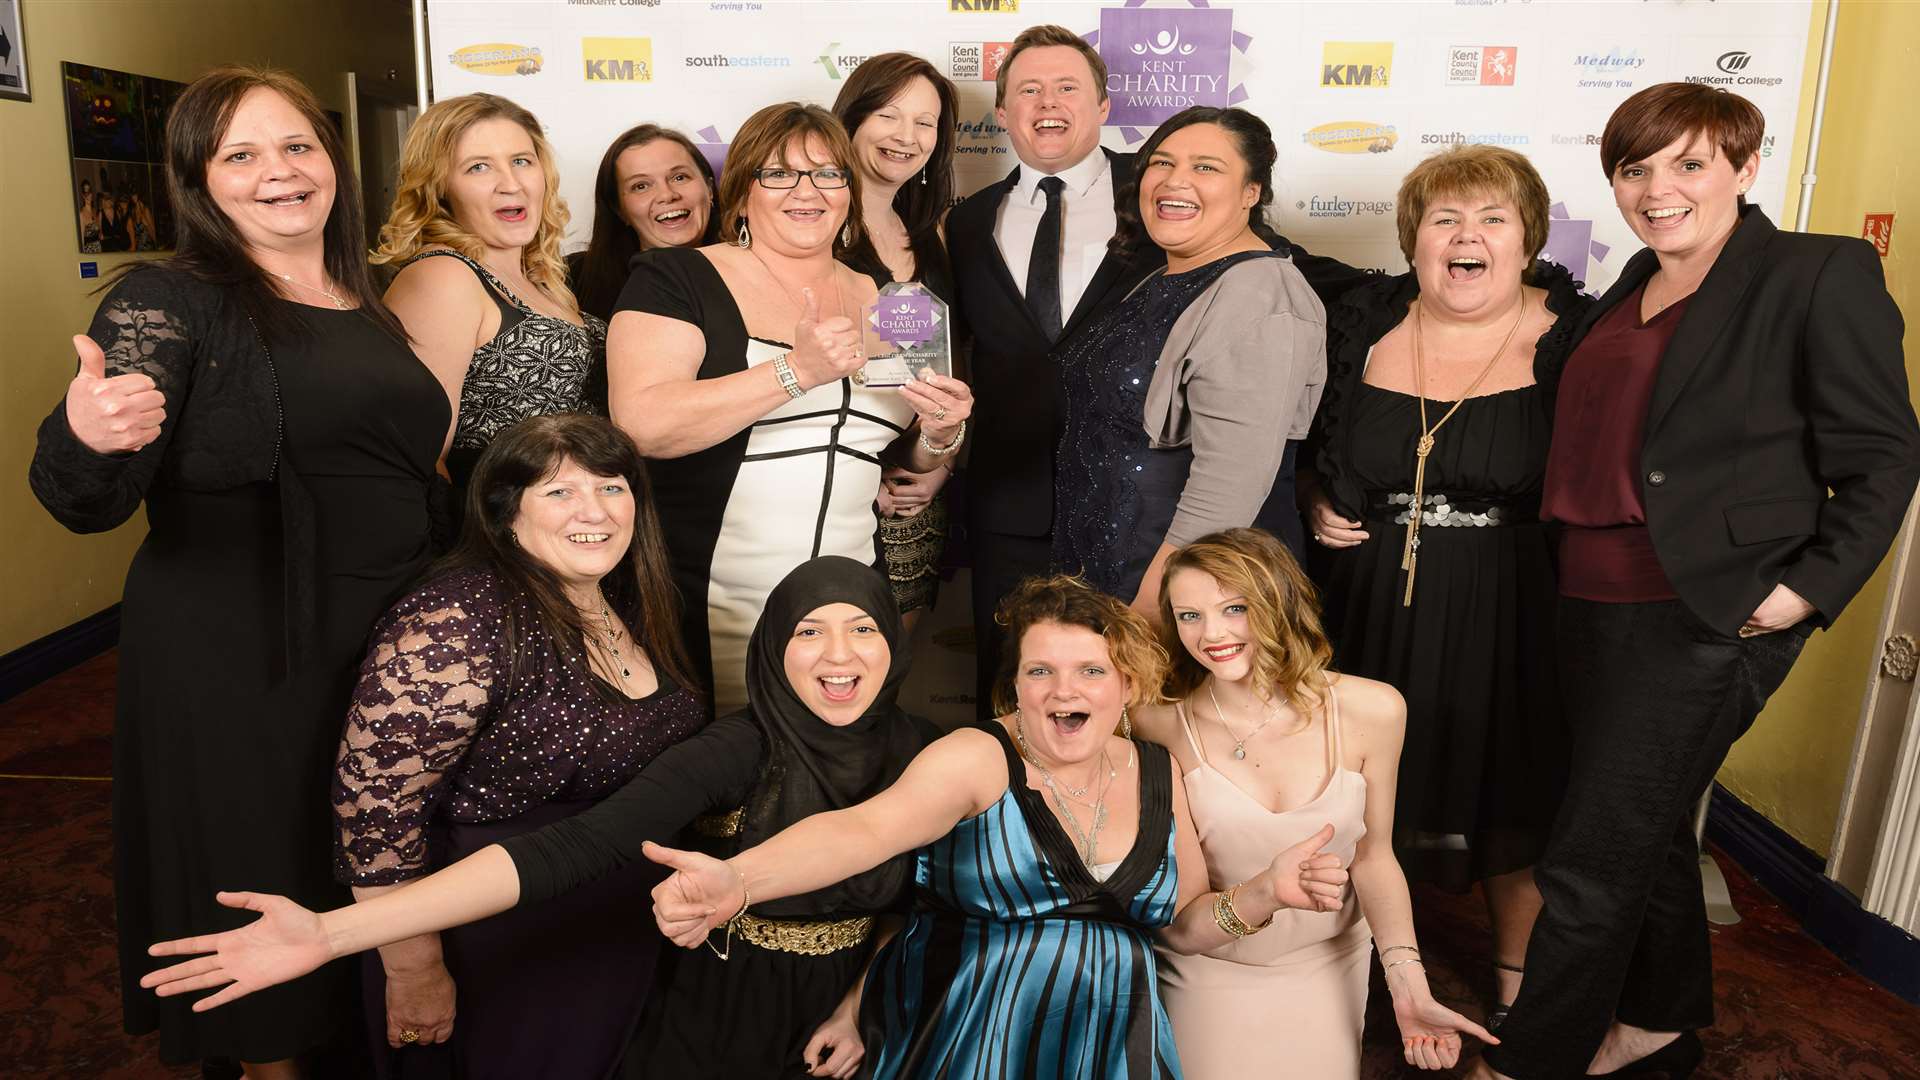 Children's Charity of the Year, Action for Children - Folkestone Early Years Centre